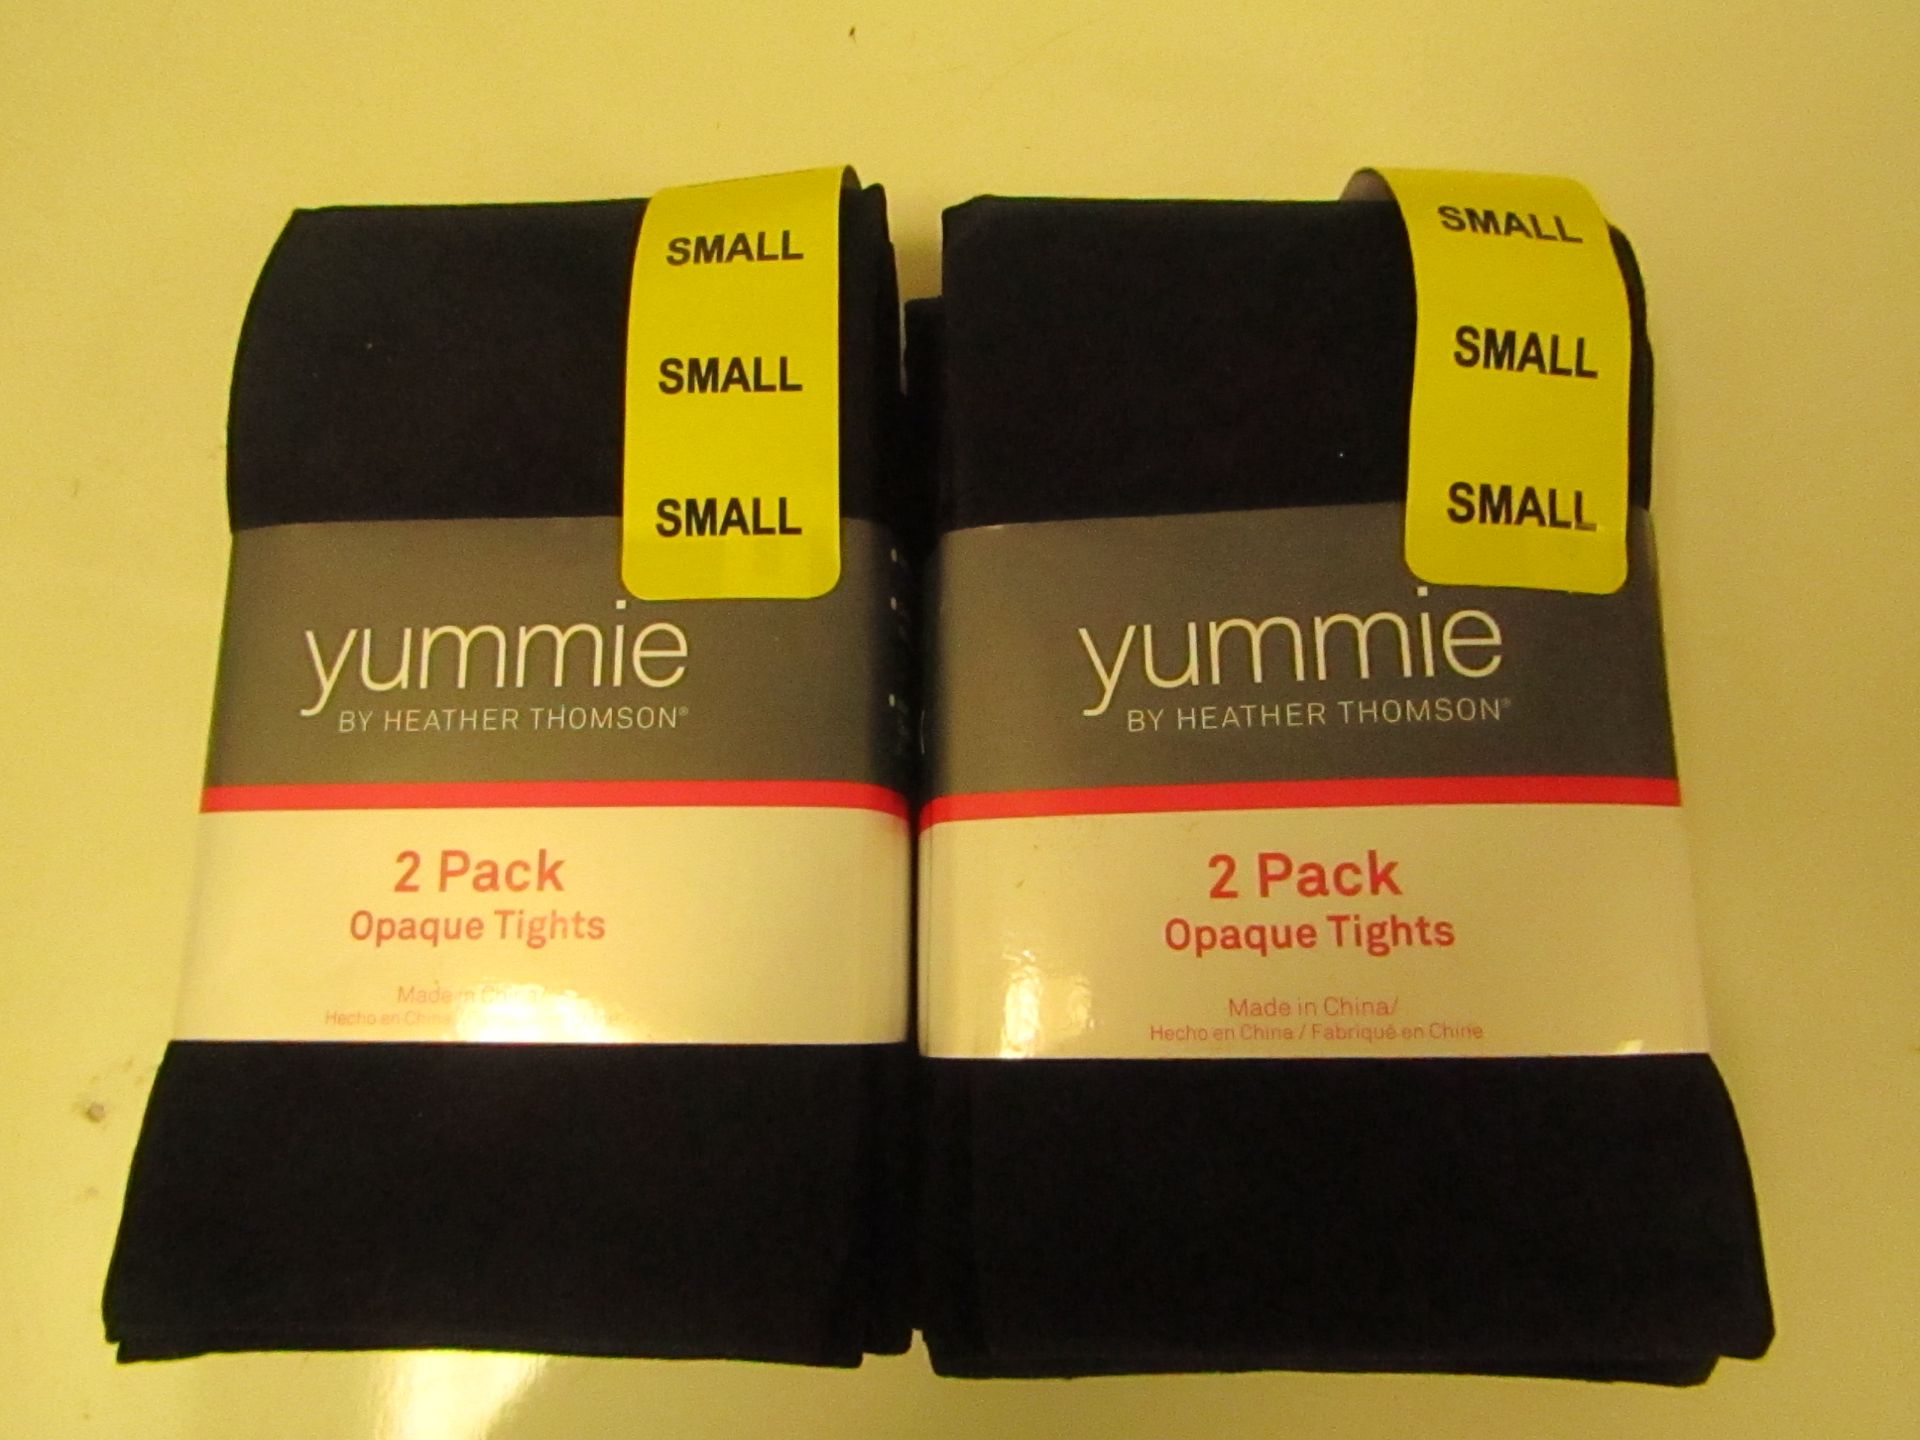 2x Packs of 2 Yummie opaque tights,Black size S, new & packaged